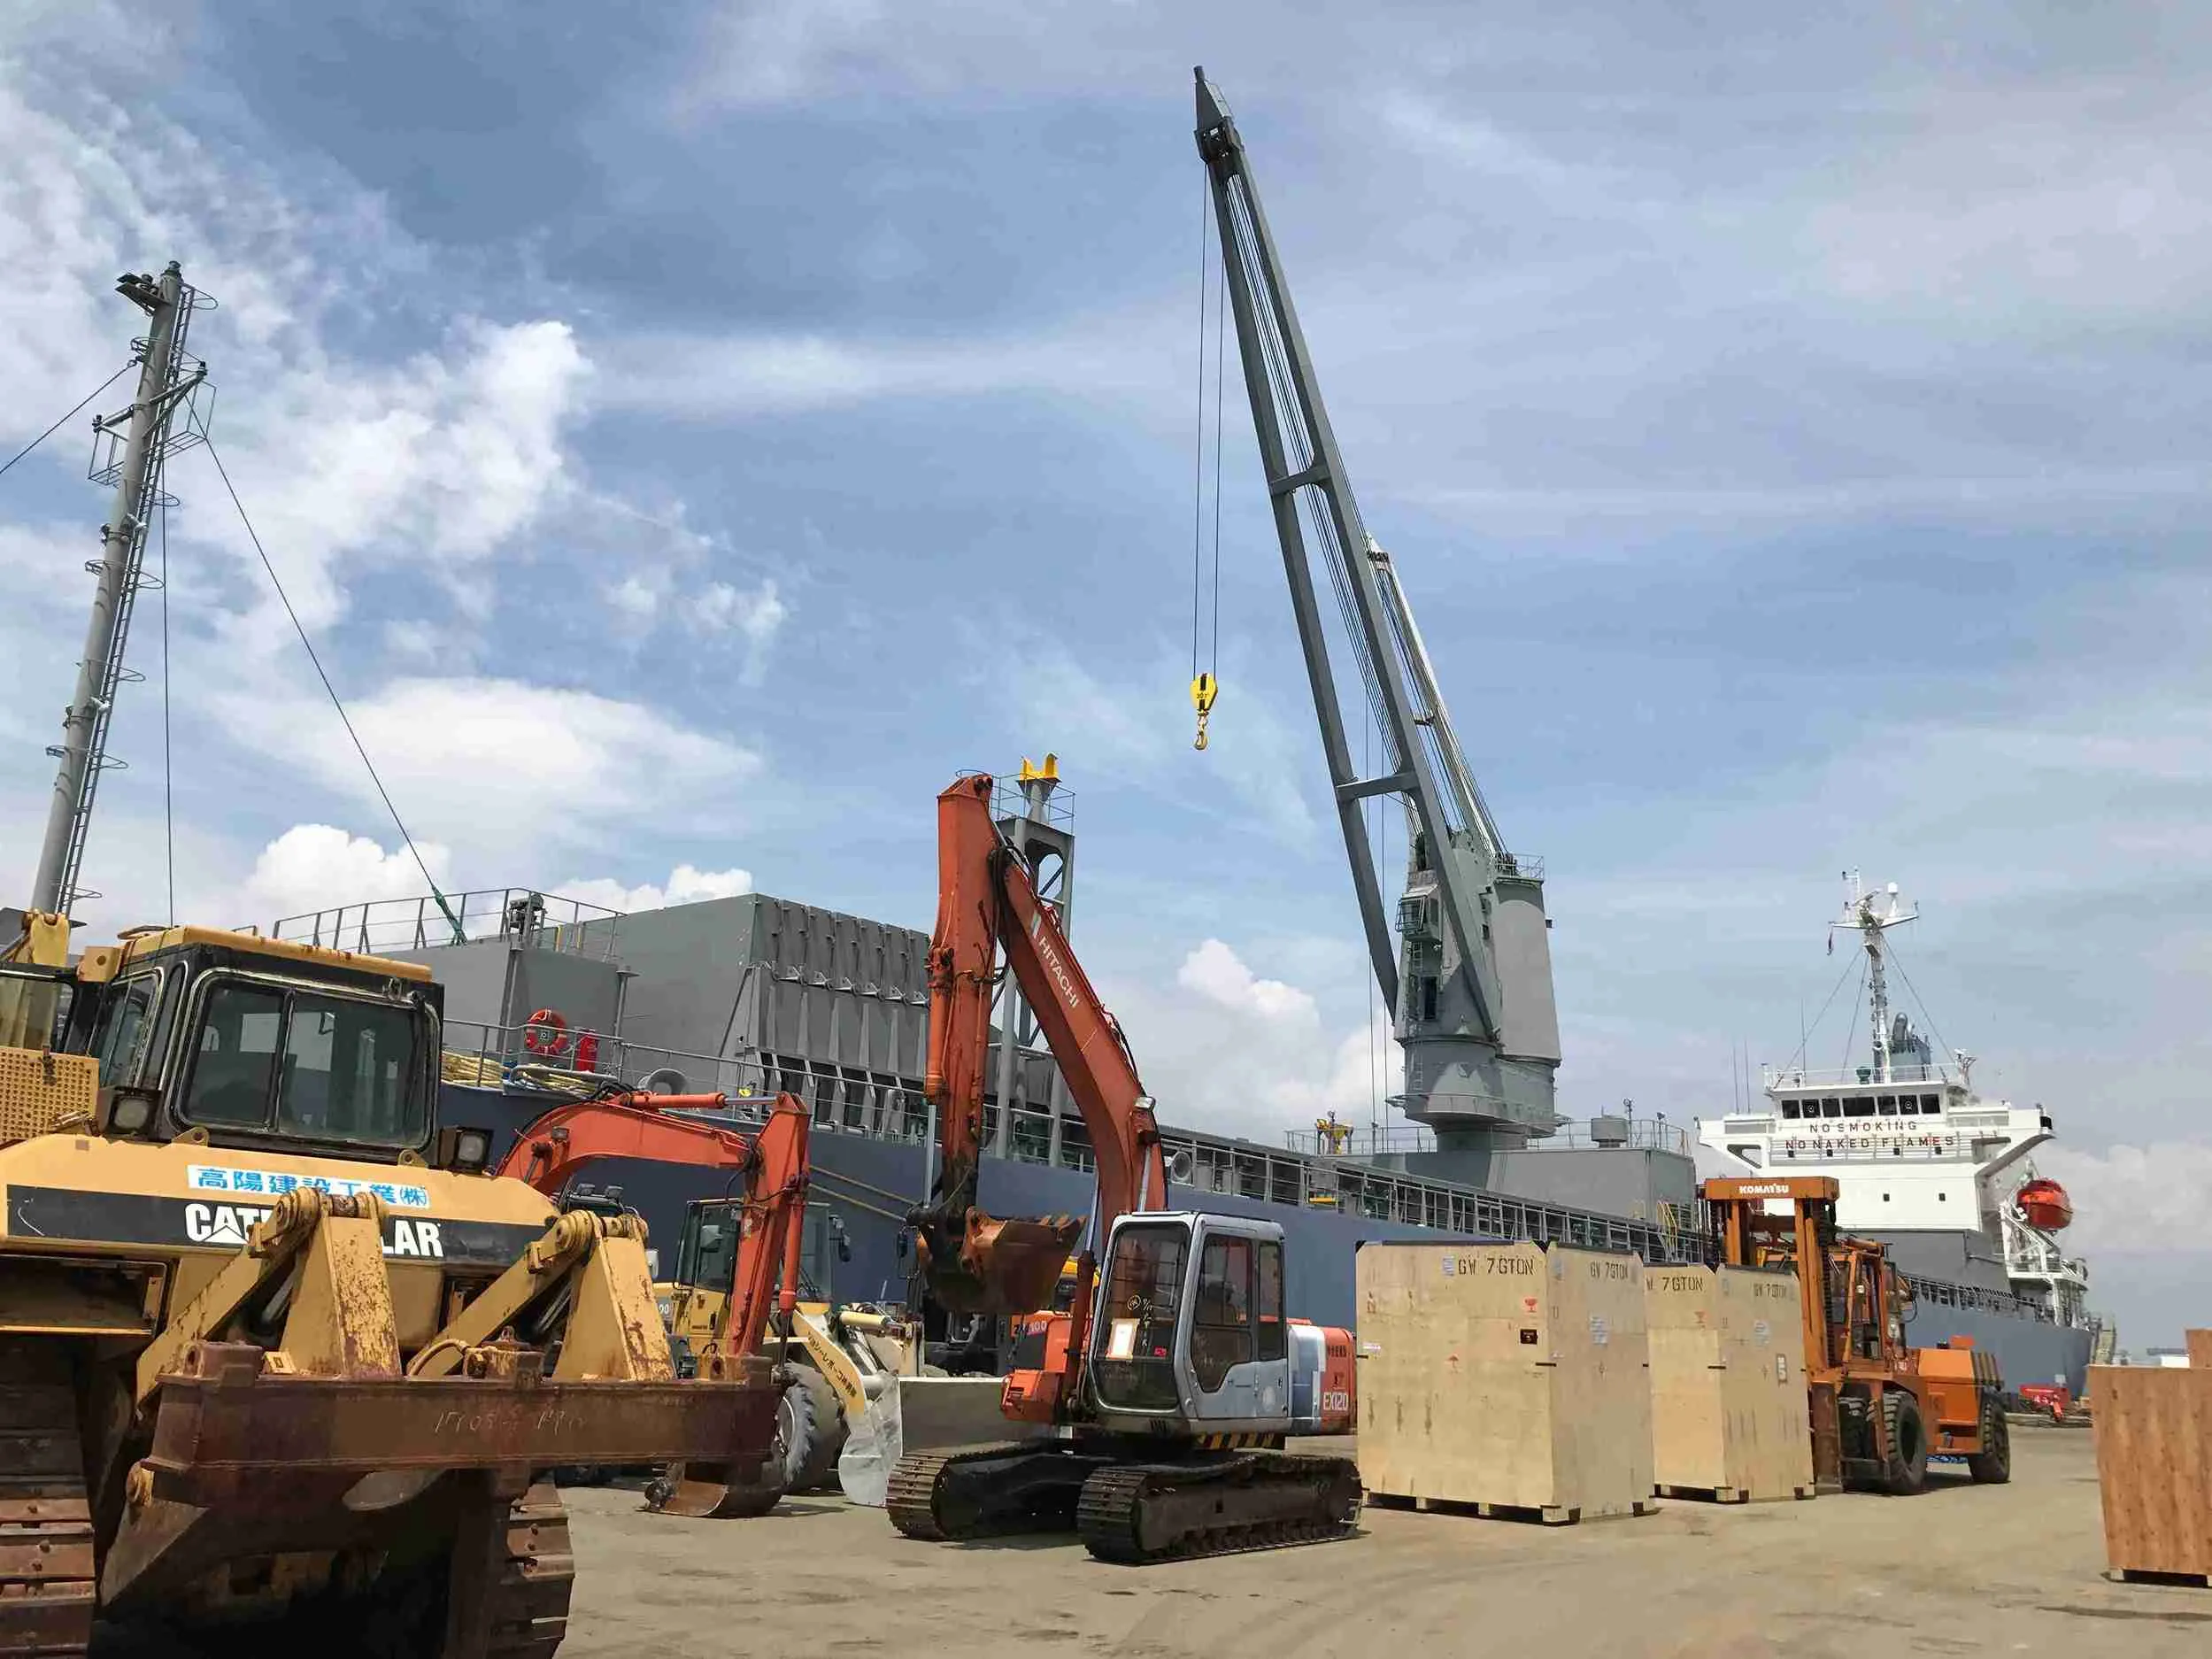 Examples of export used construction machinery handling